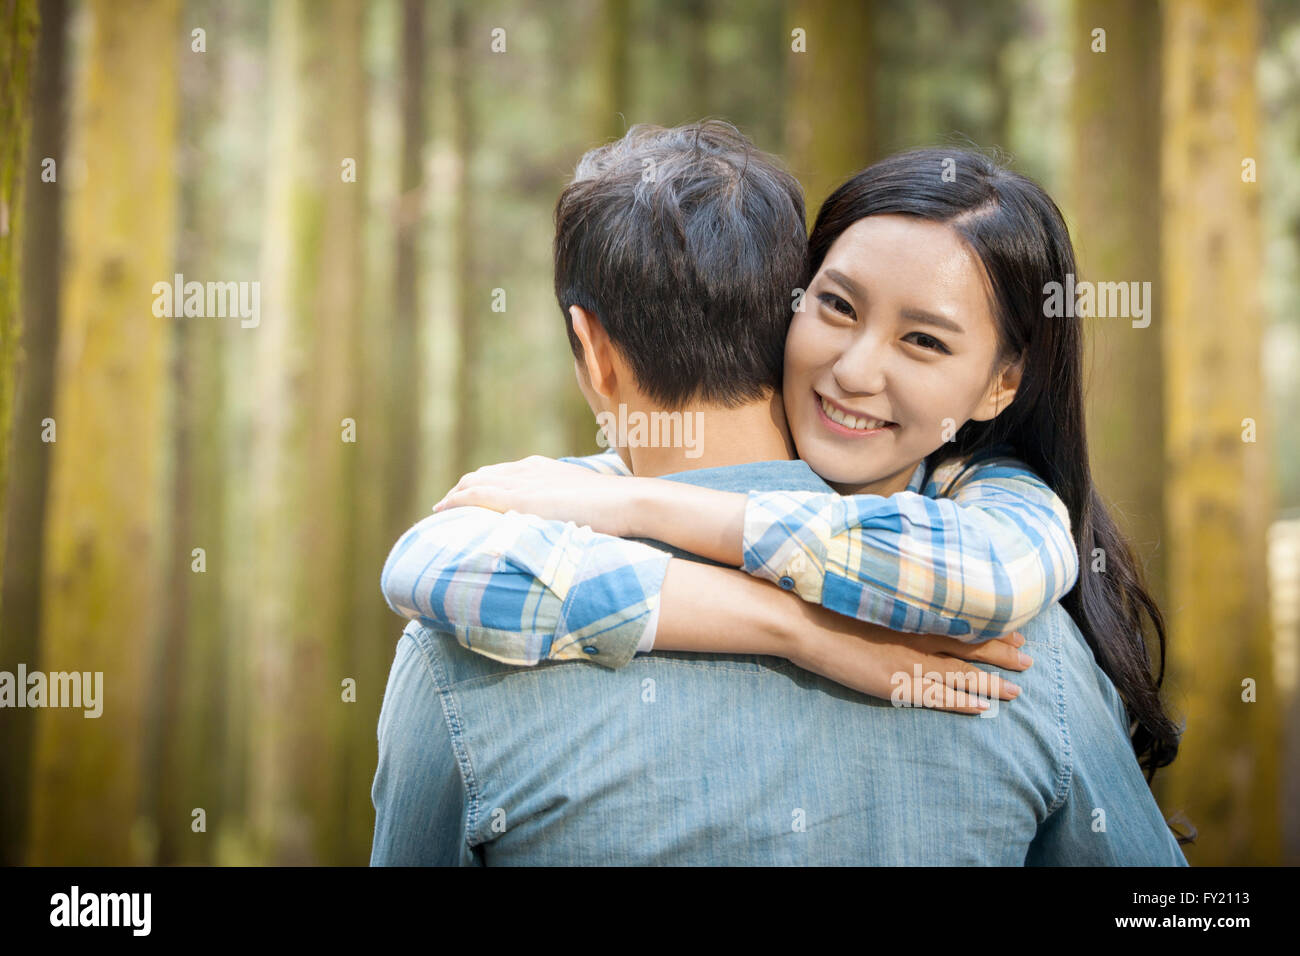 Woman hugging her boyfriend and smiling Banque D'Images